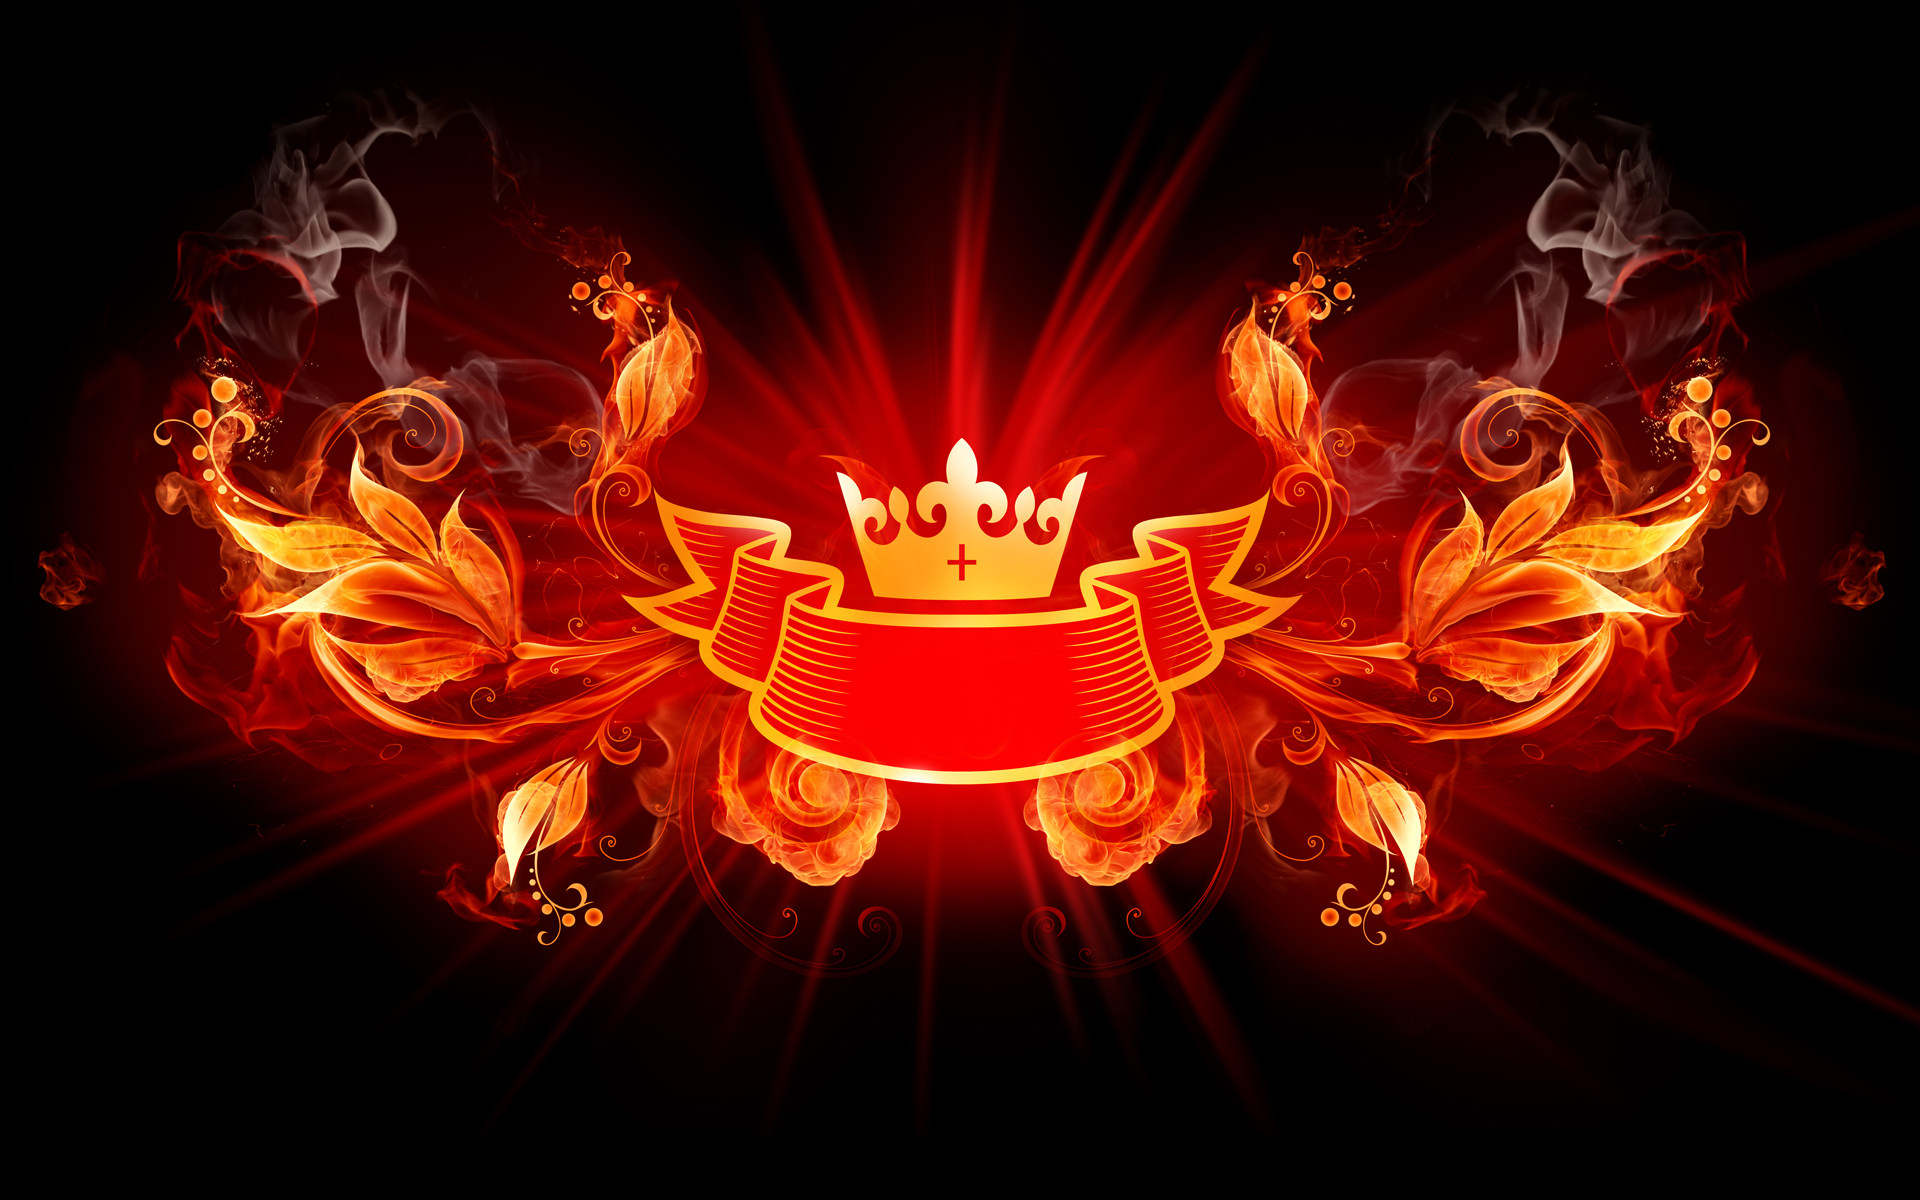 Fiery Crown Is A Great Wallpaper For Your Puter Desktop And Laptop